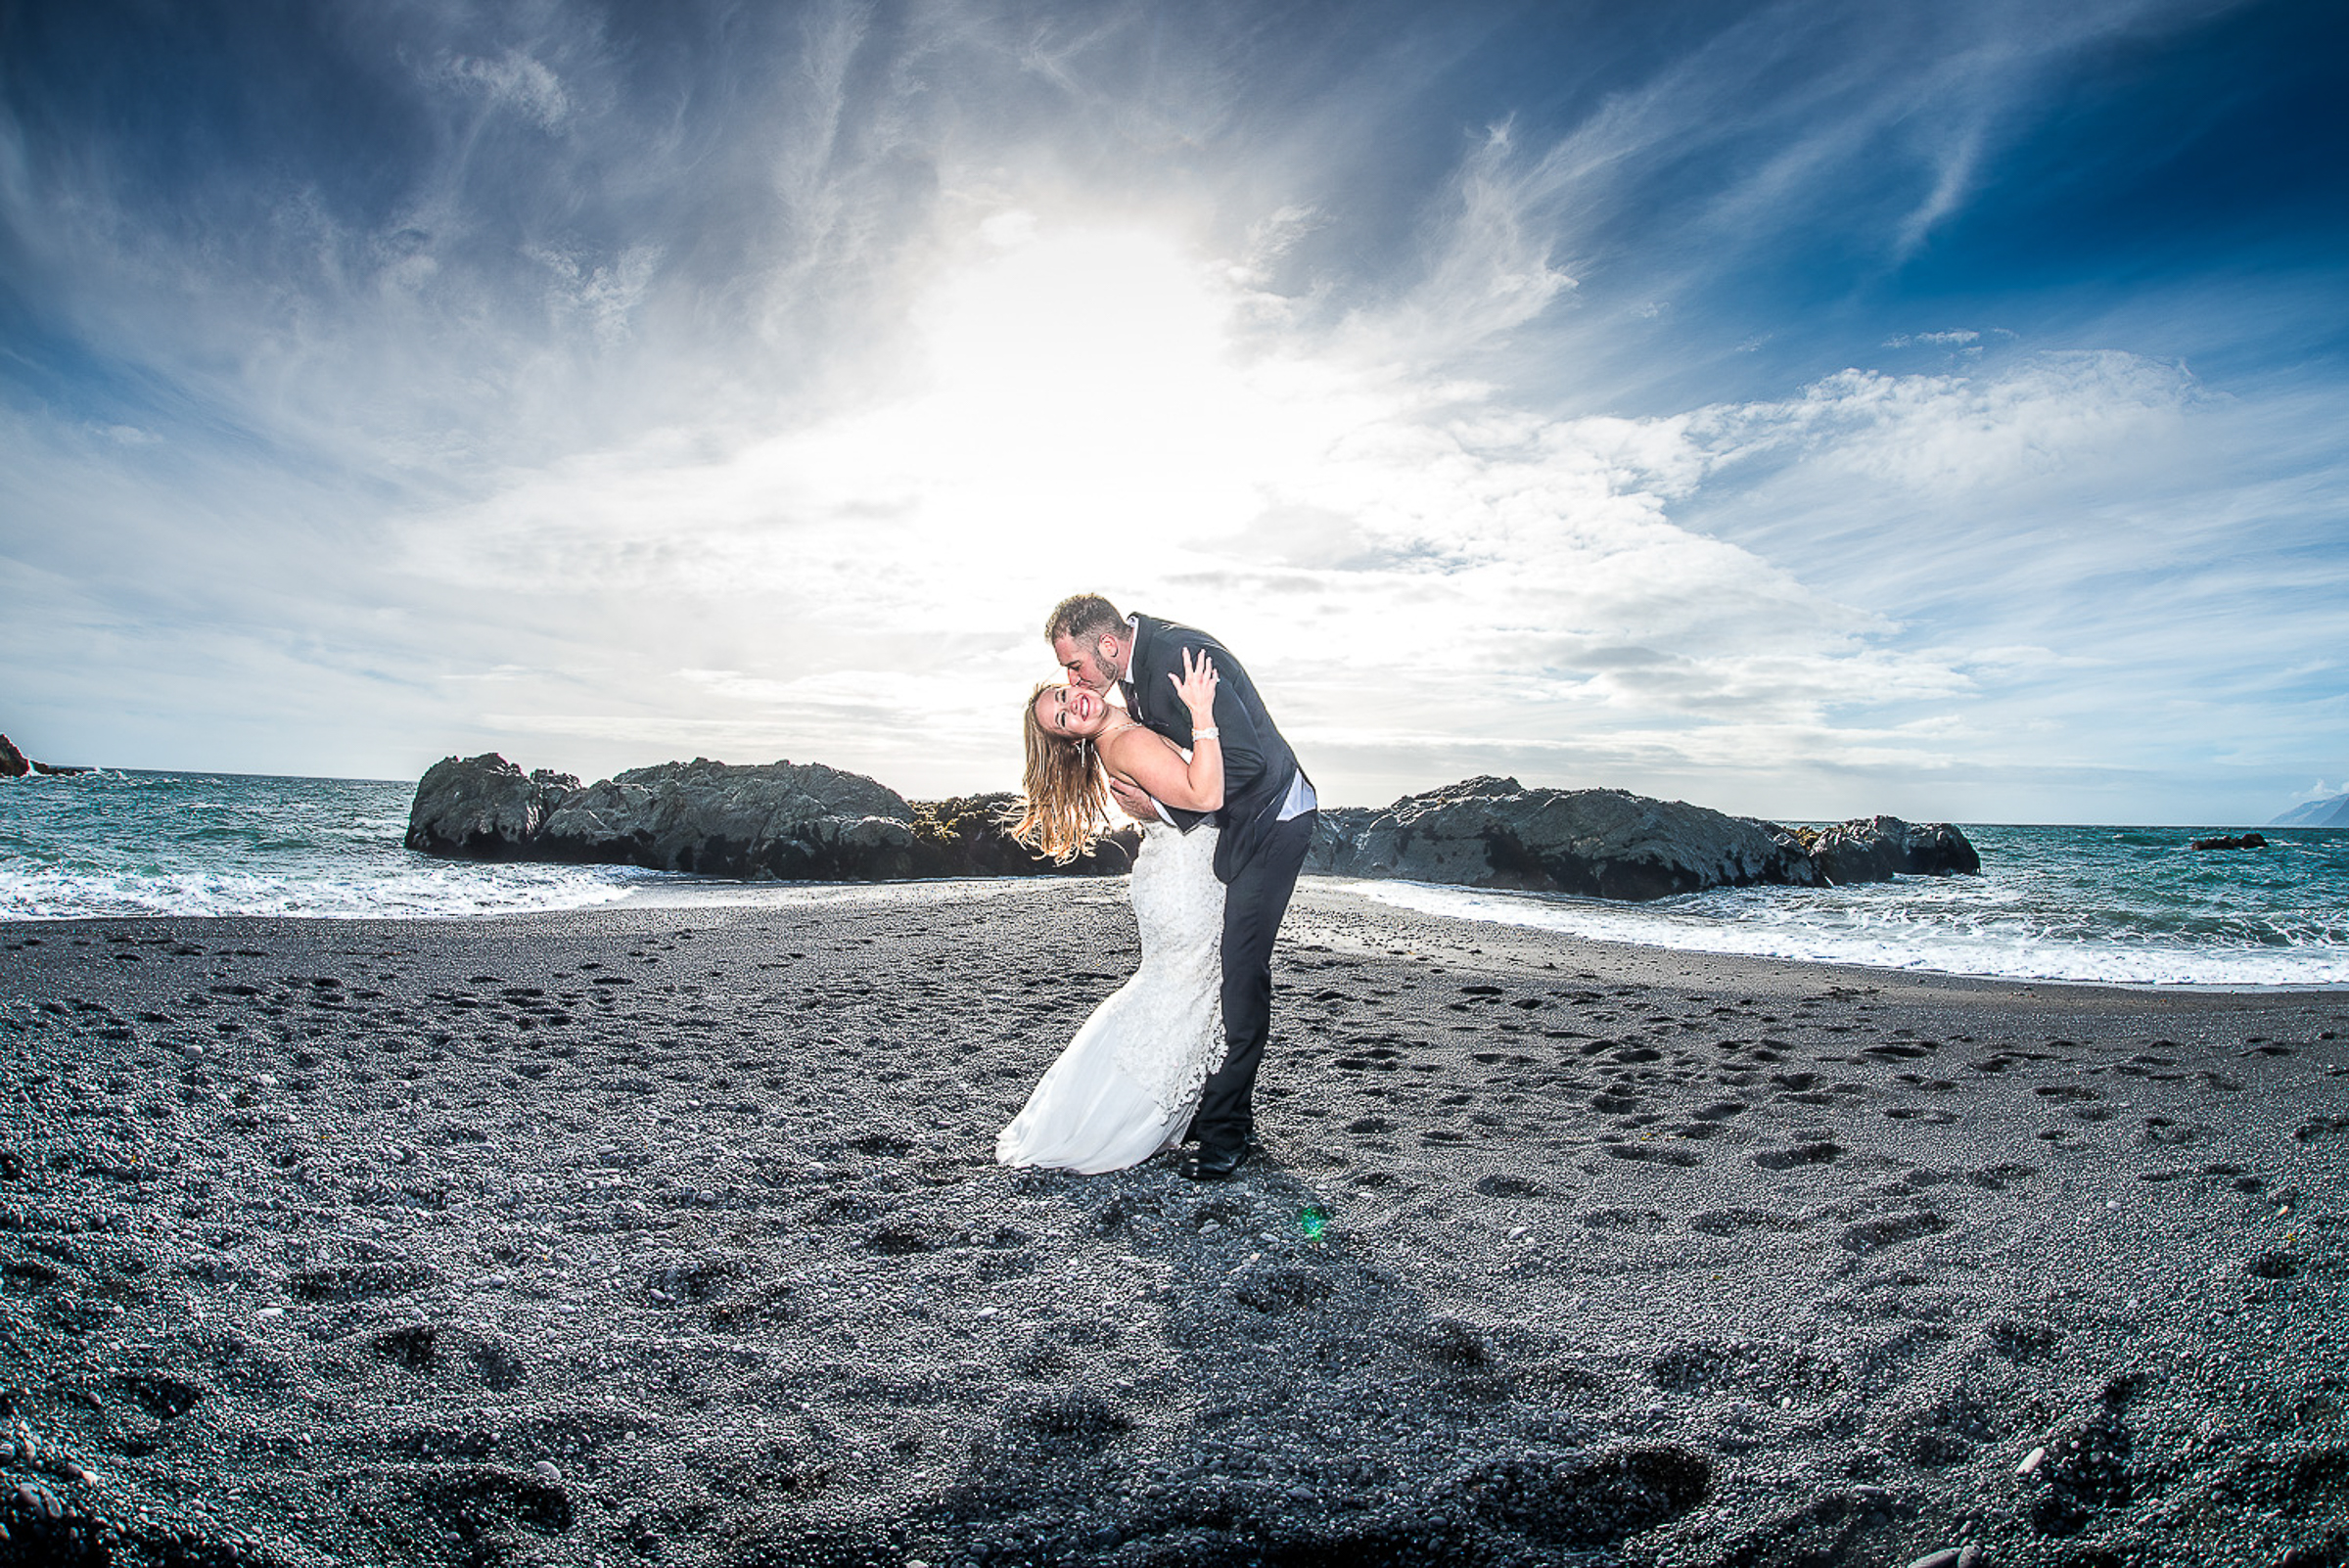  John and Danielle's Intimate Destination Wedding at Little Black Sands Beach in Shelter Cove  